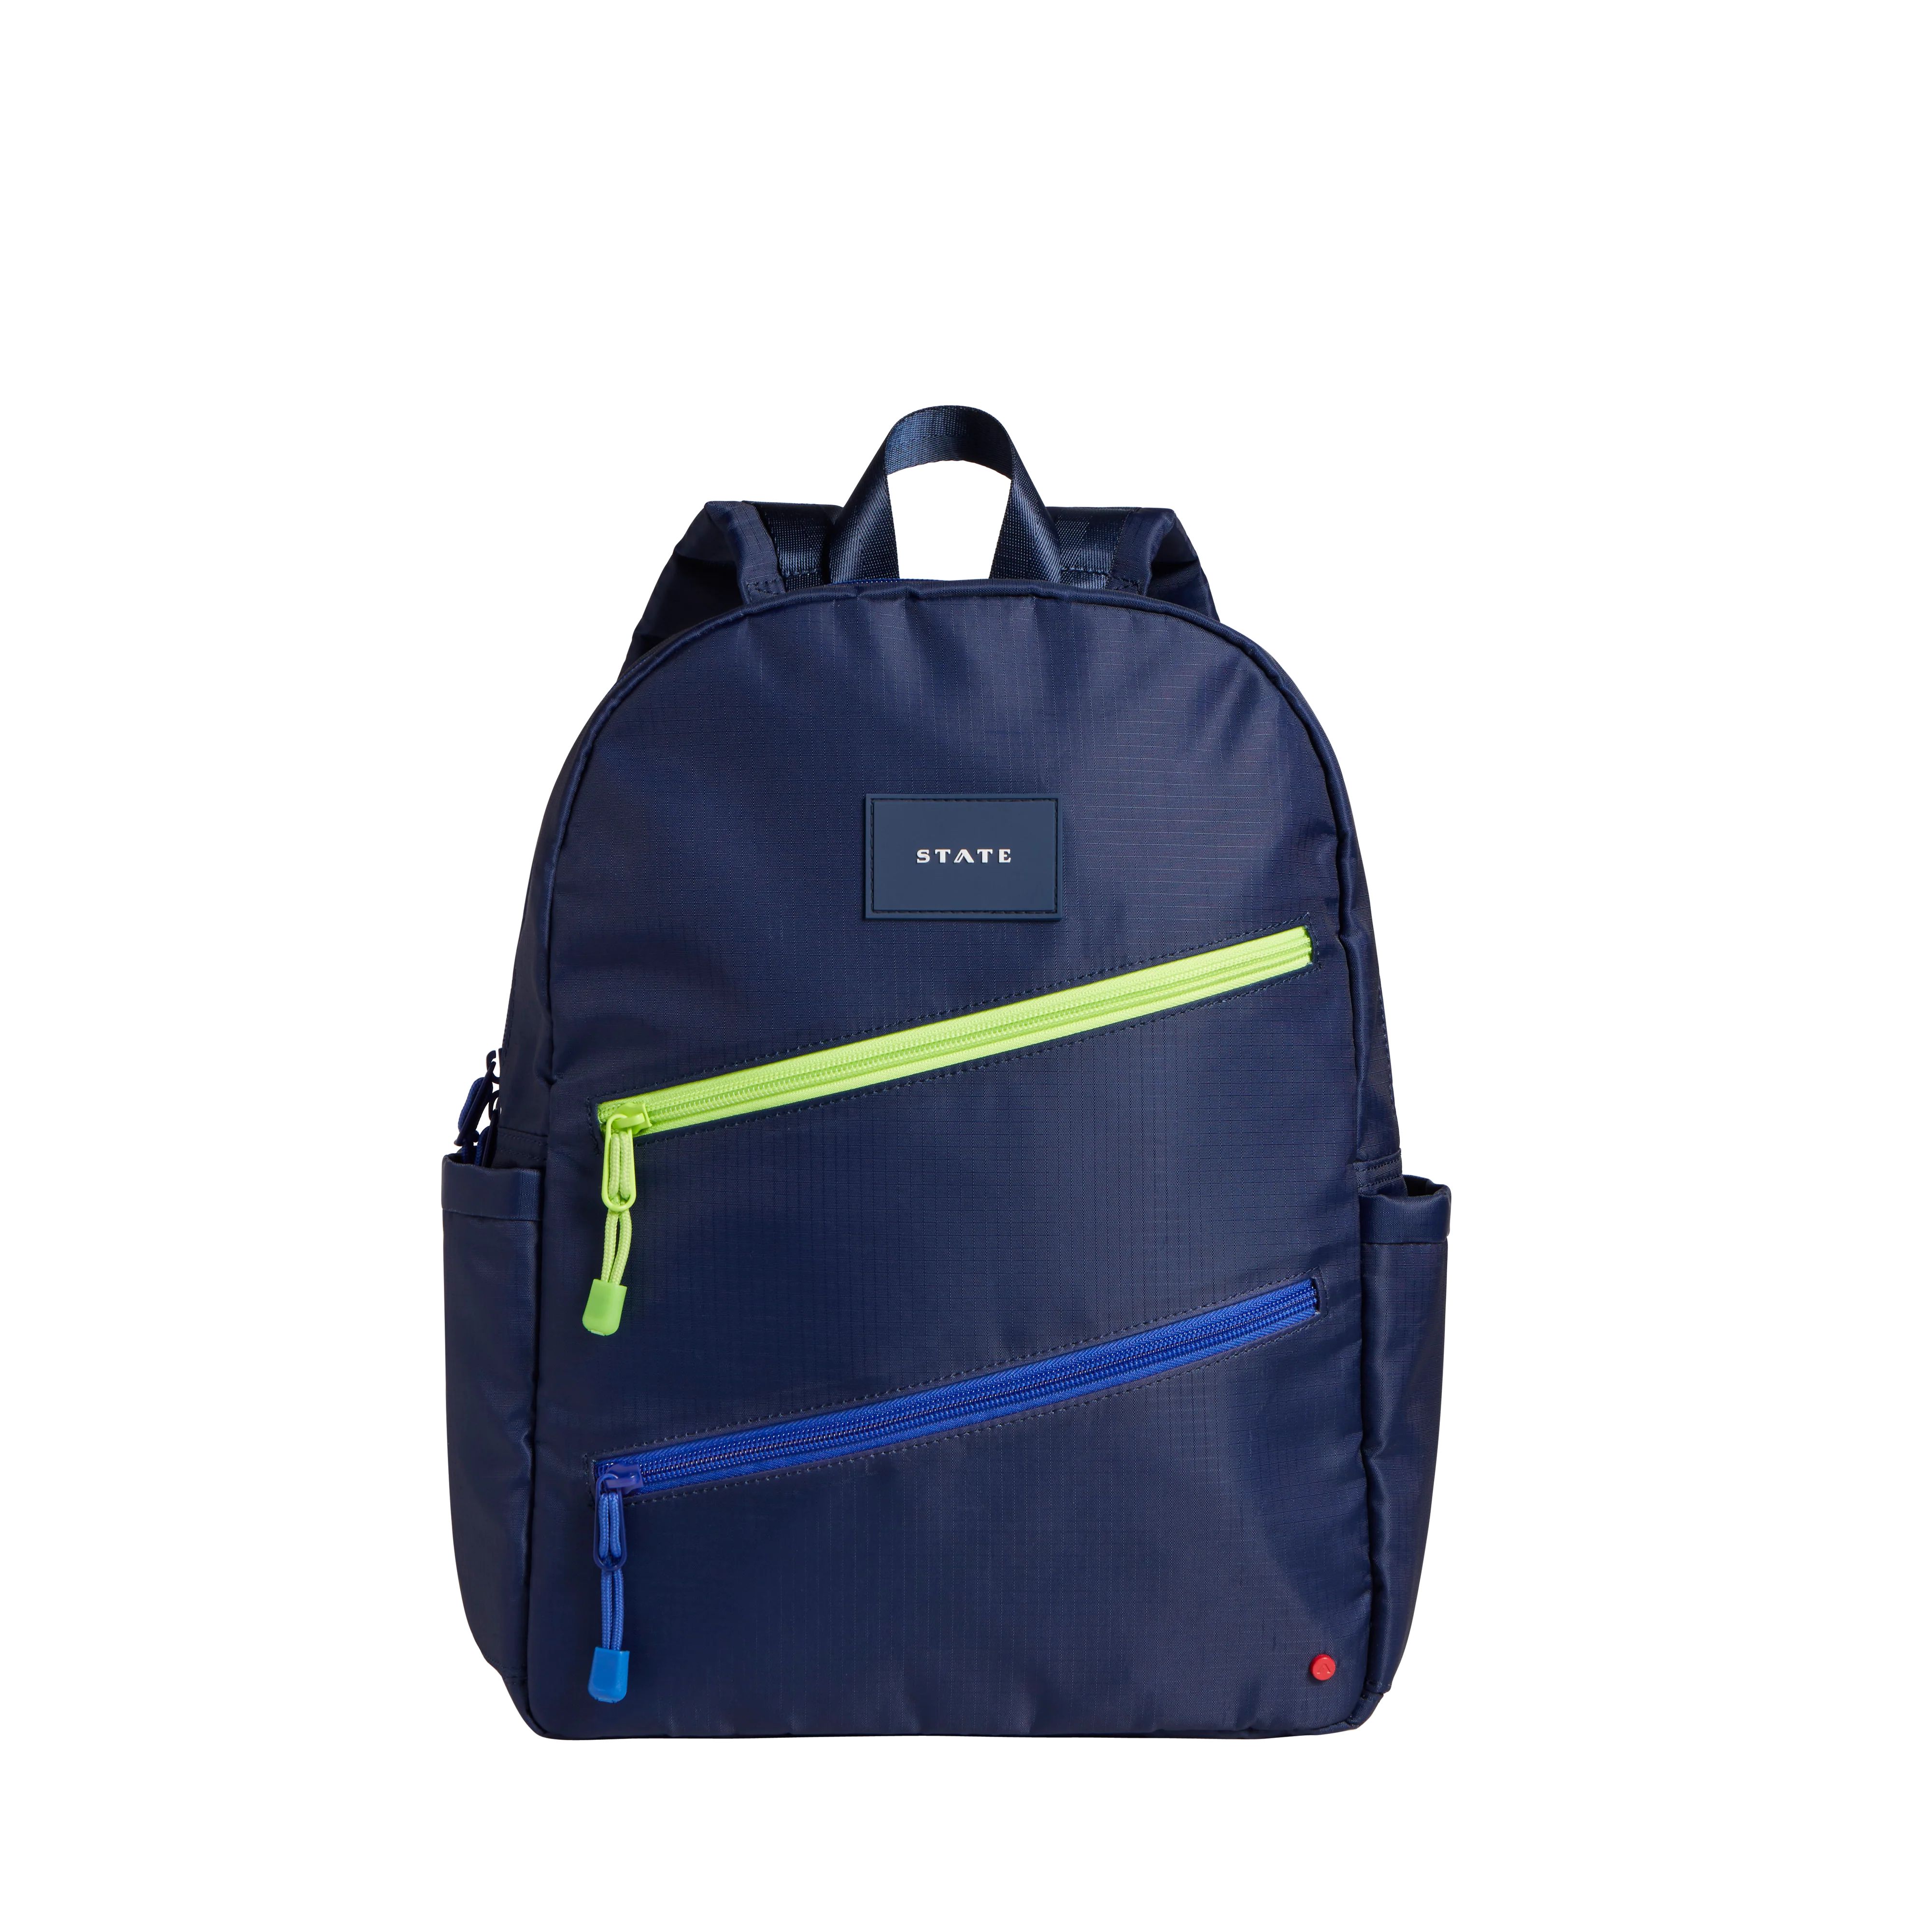 STATE Bags Kane Kids Backpack Ripstop Diagonal Zippers | STATE Bags